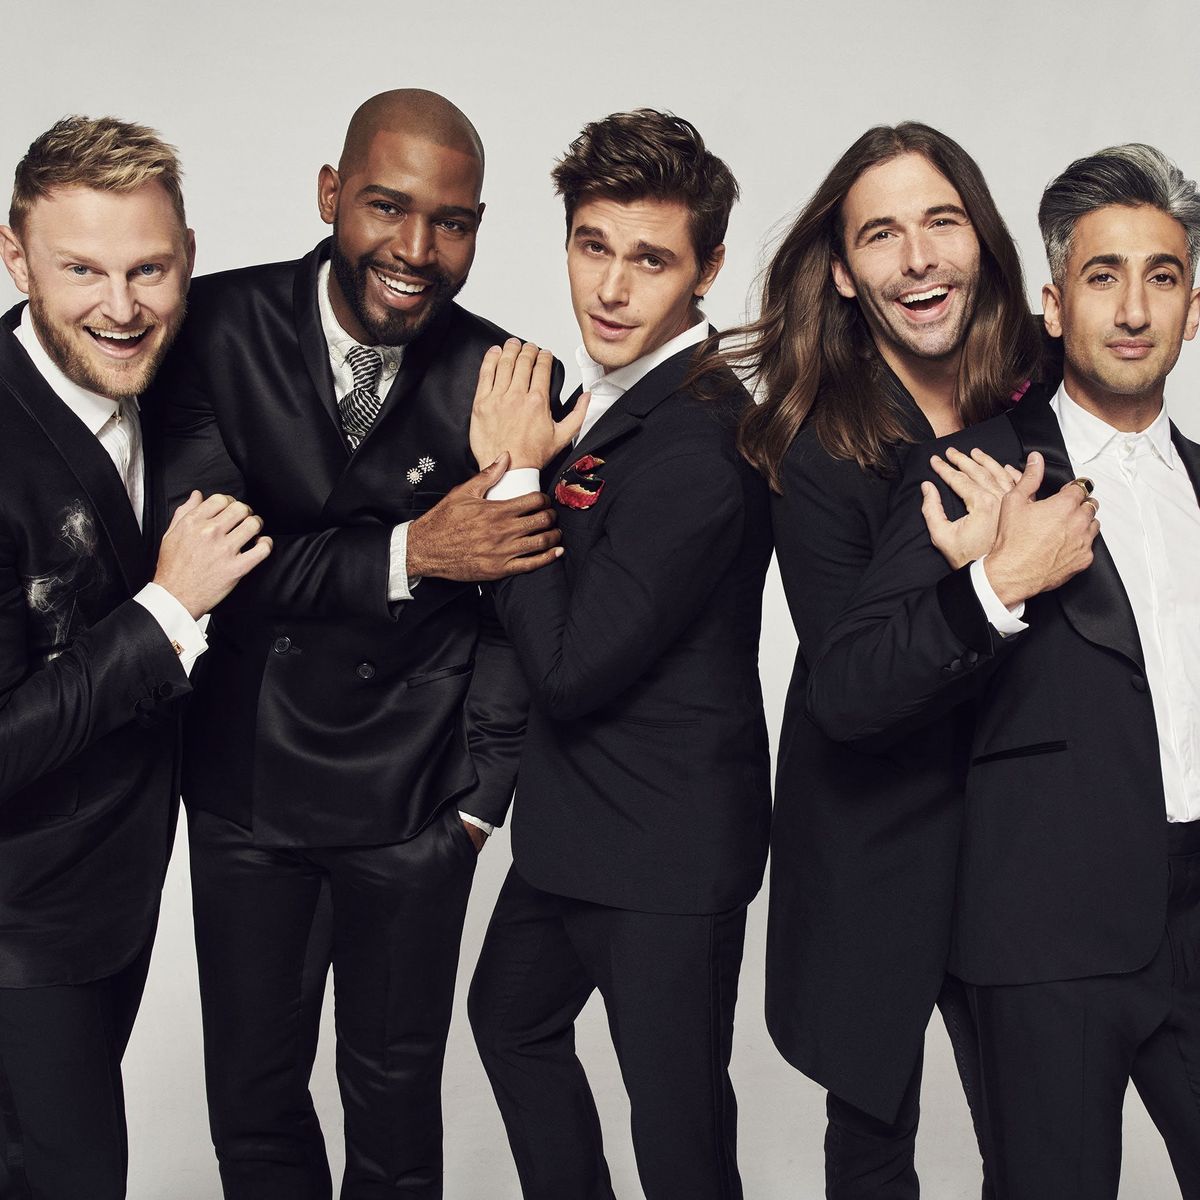 9 Shows to Watch If You Love ‘Queer Eye’ (and Already Finished Season 3)